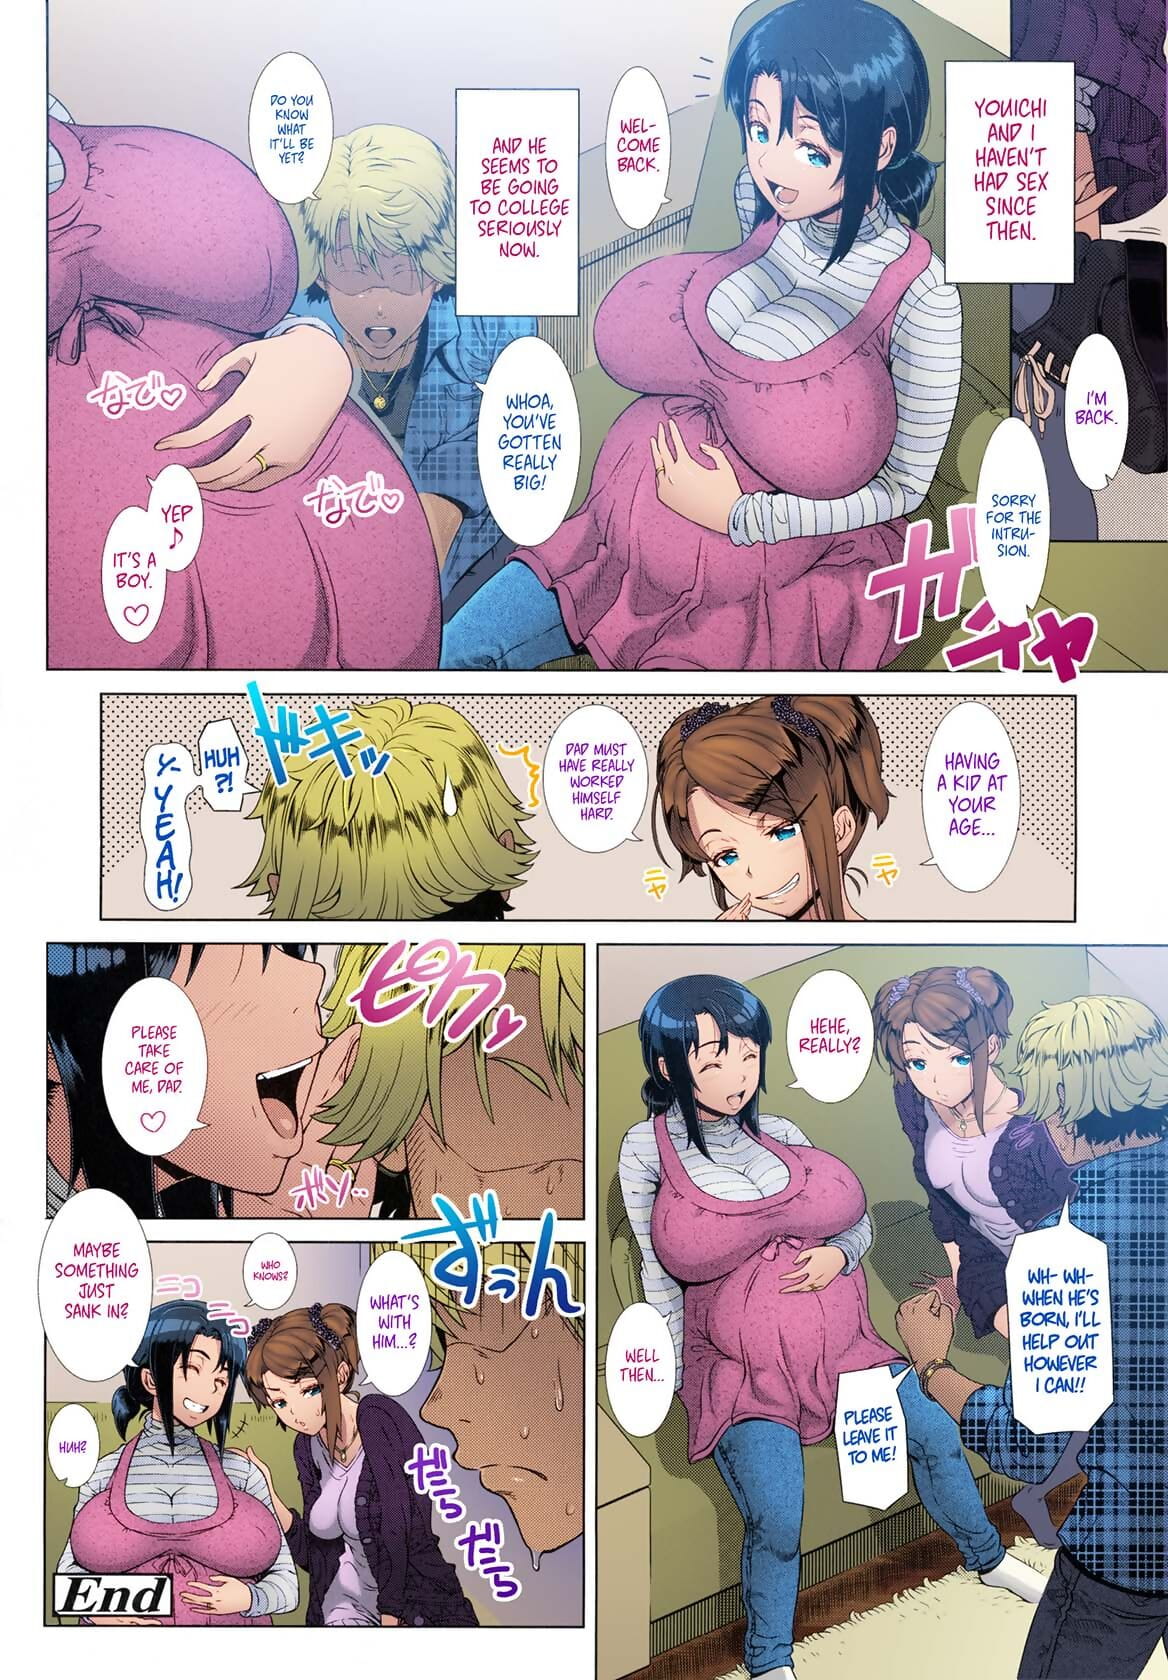 Hitozuma Life One time gal COLOR Ch.1-2 - part 2 page 1